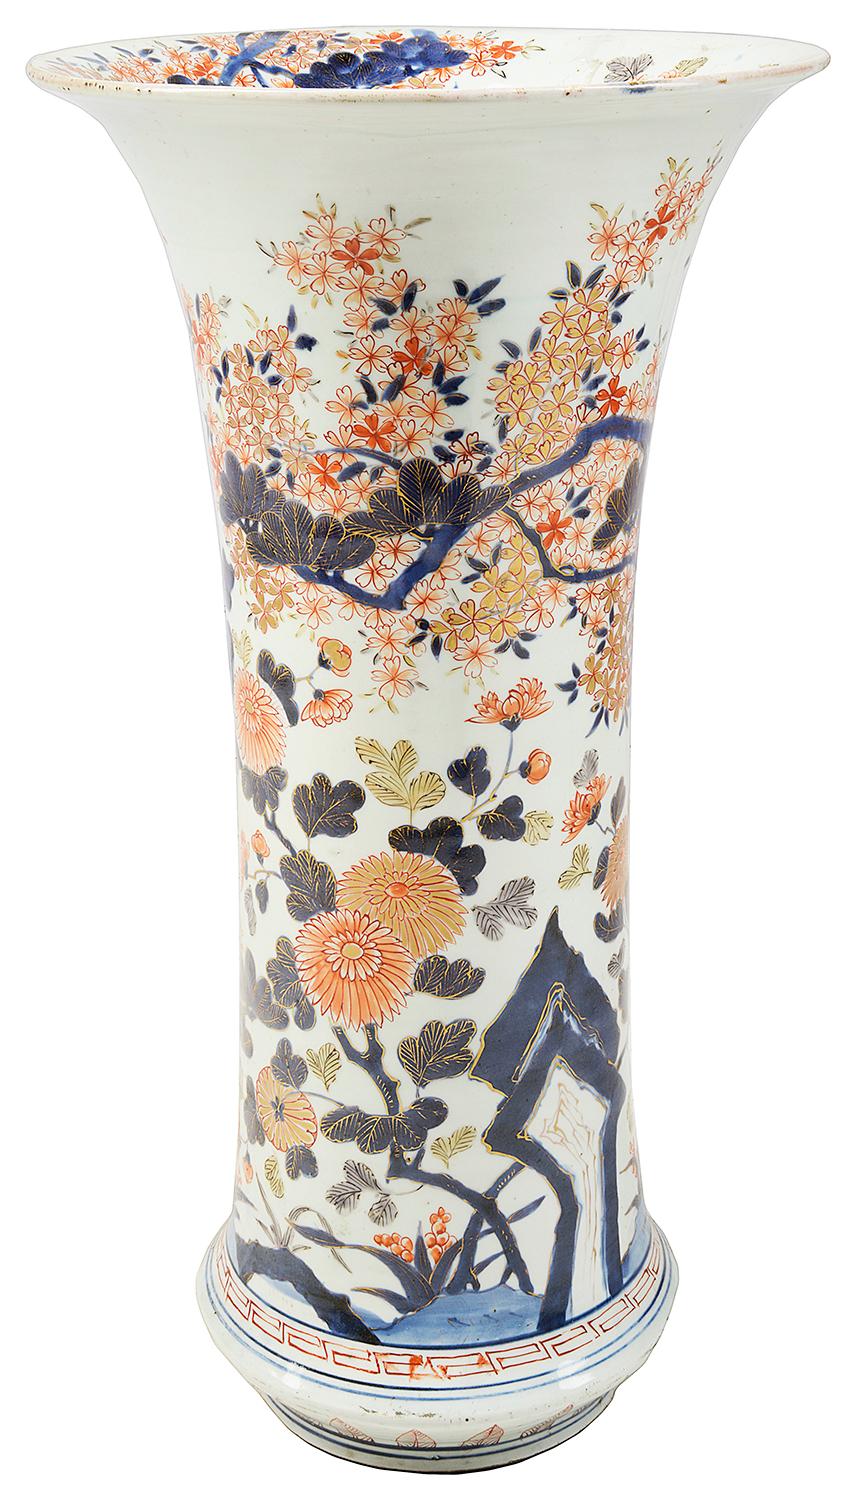 A very impressive Edo period (1603-1868) Japanese Arita spill vase in perfect condition and good bold colors.